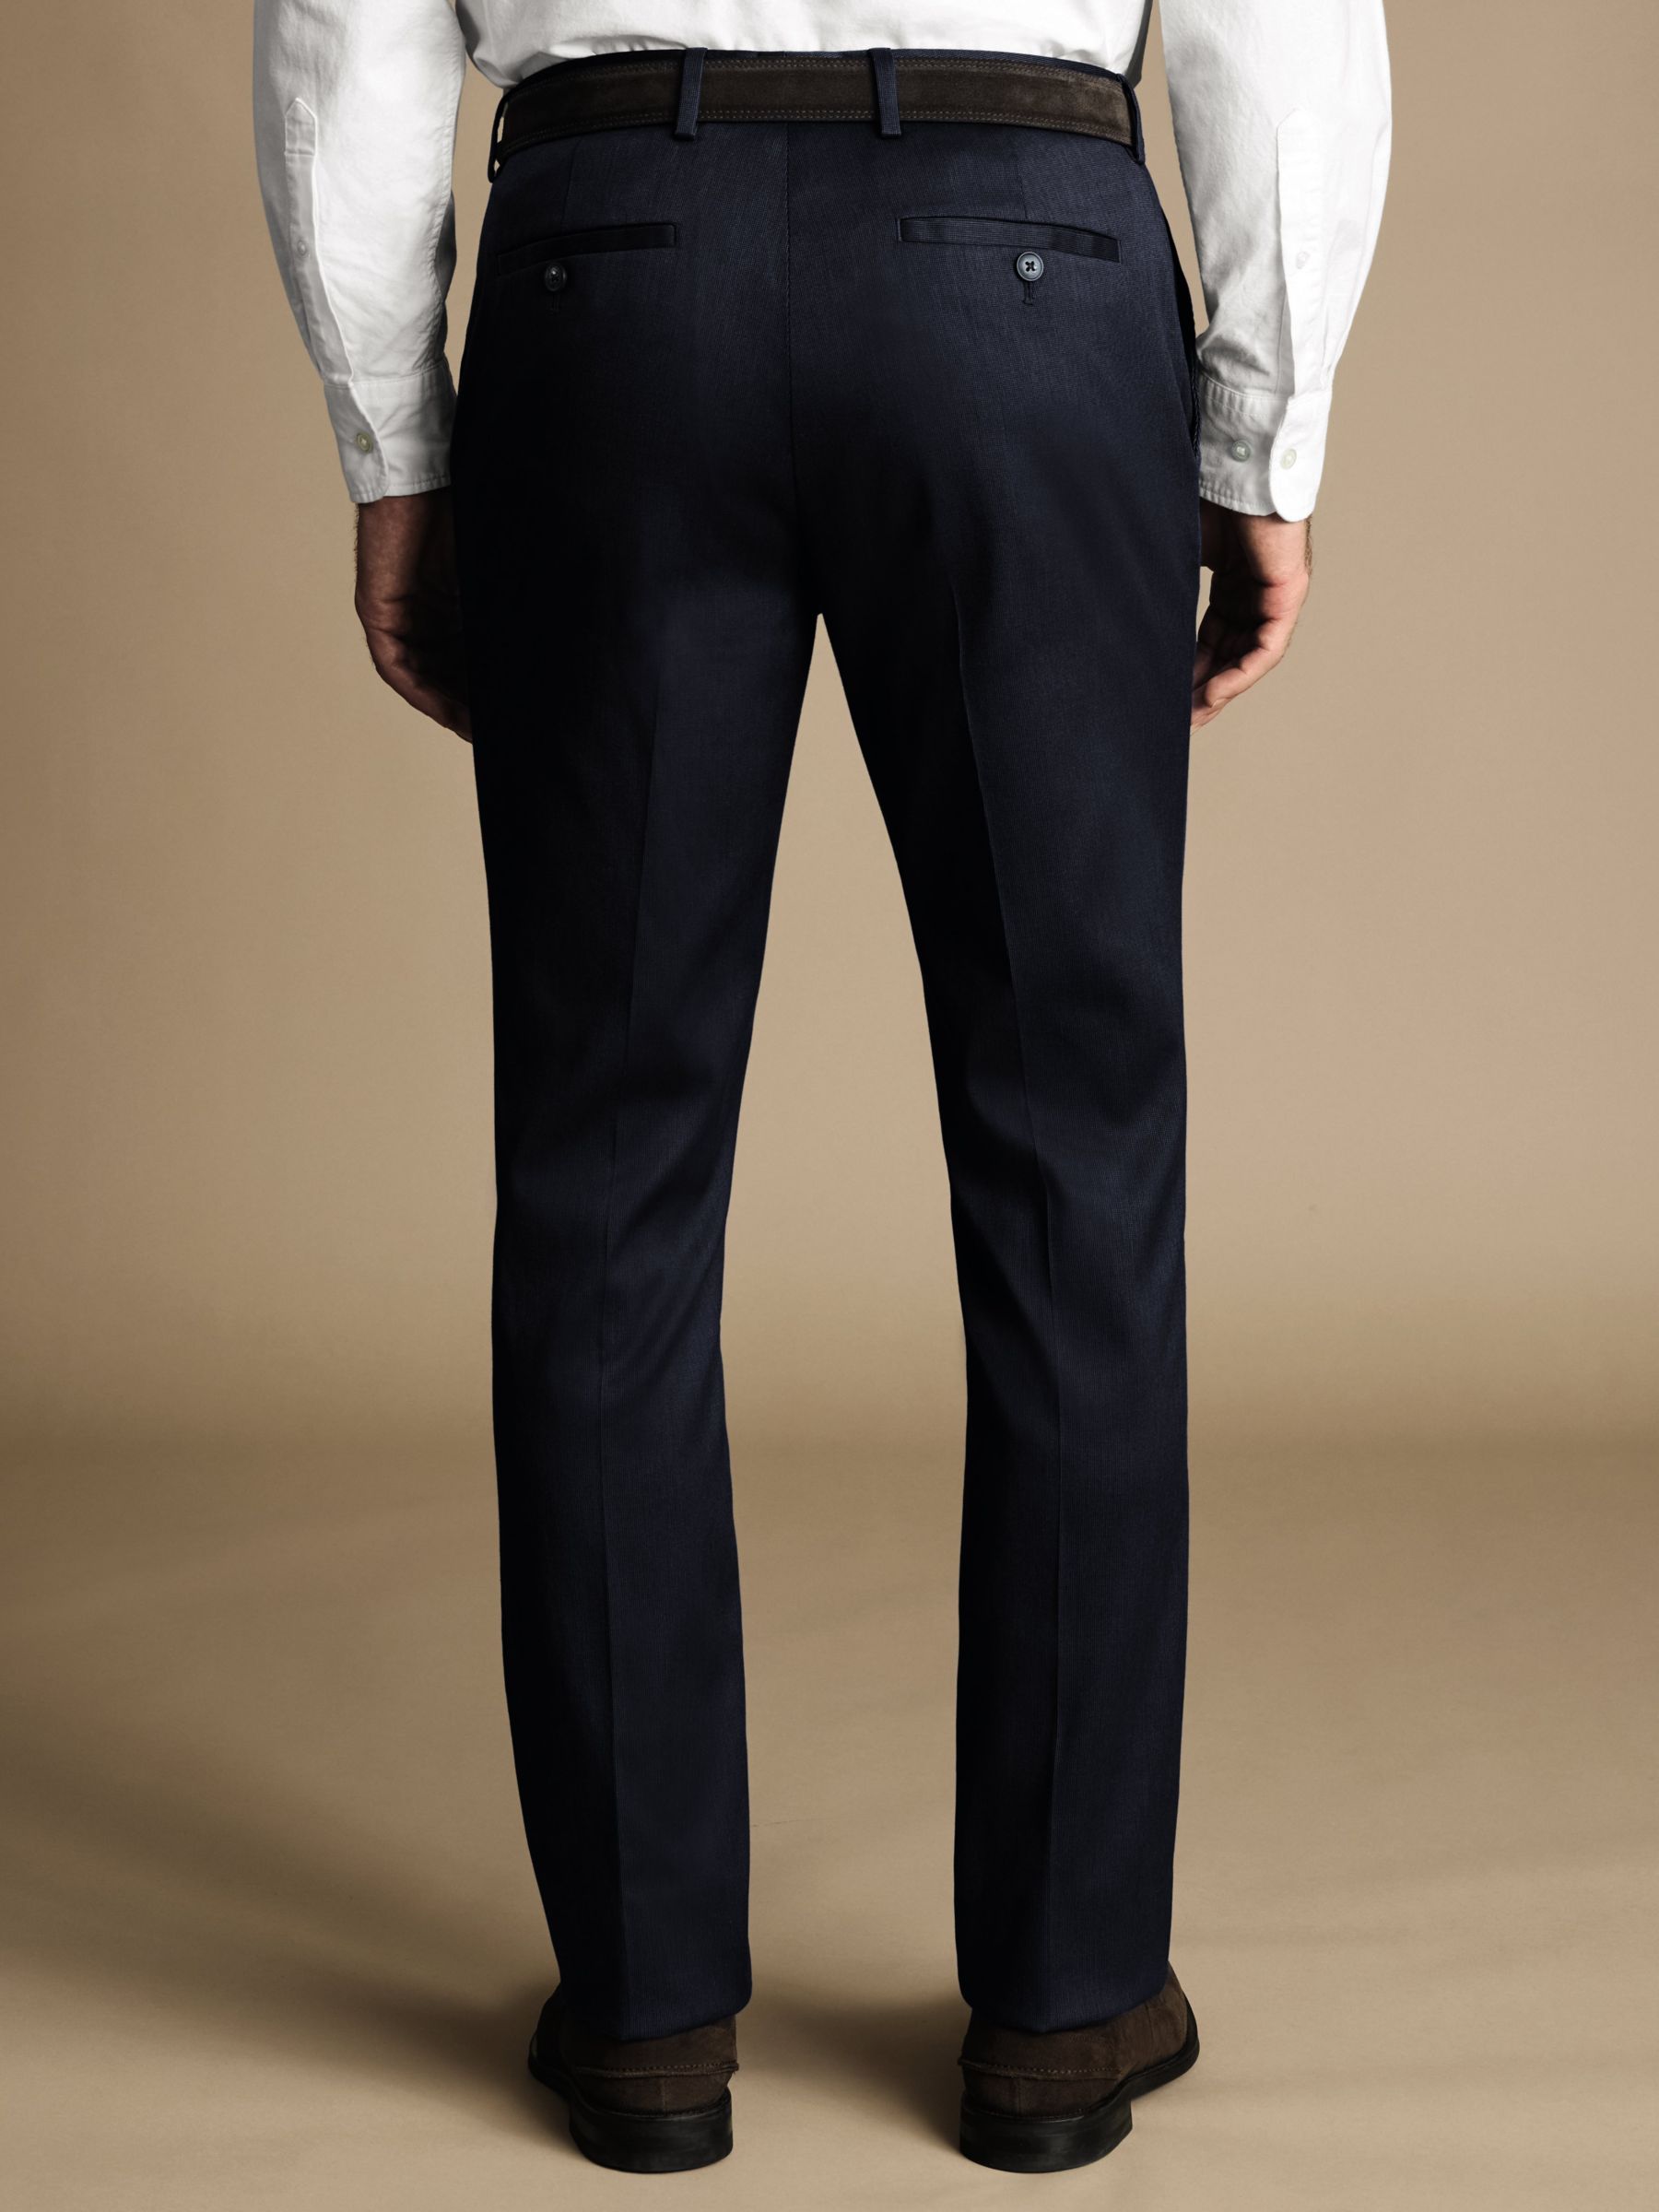 Buy Charles Tyrwhitt Smart Texture Classic Fit Trousers Online at johnlewis.com